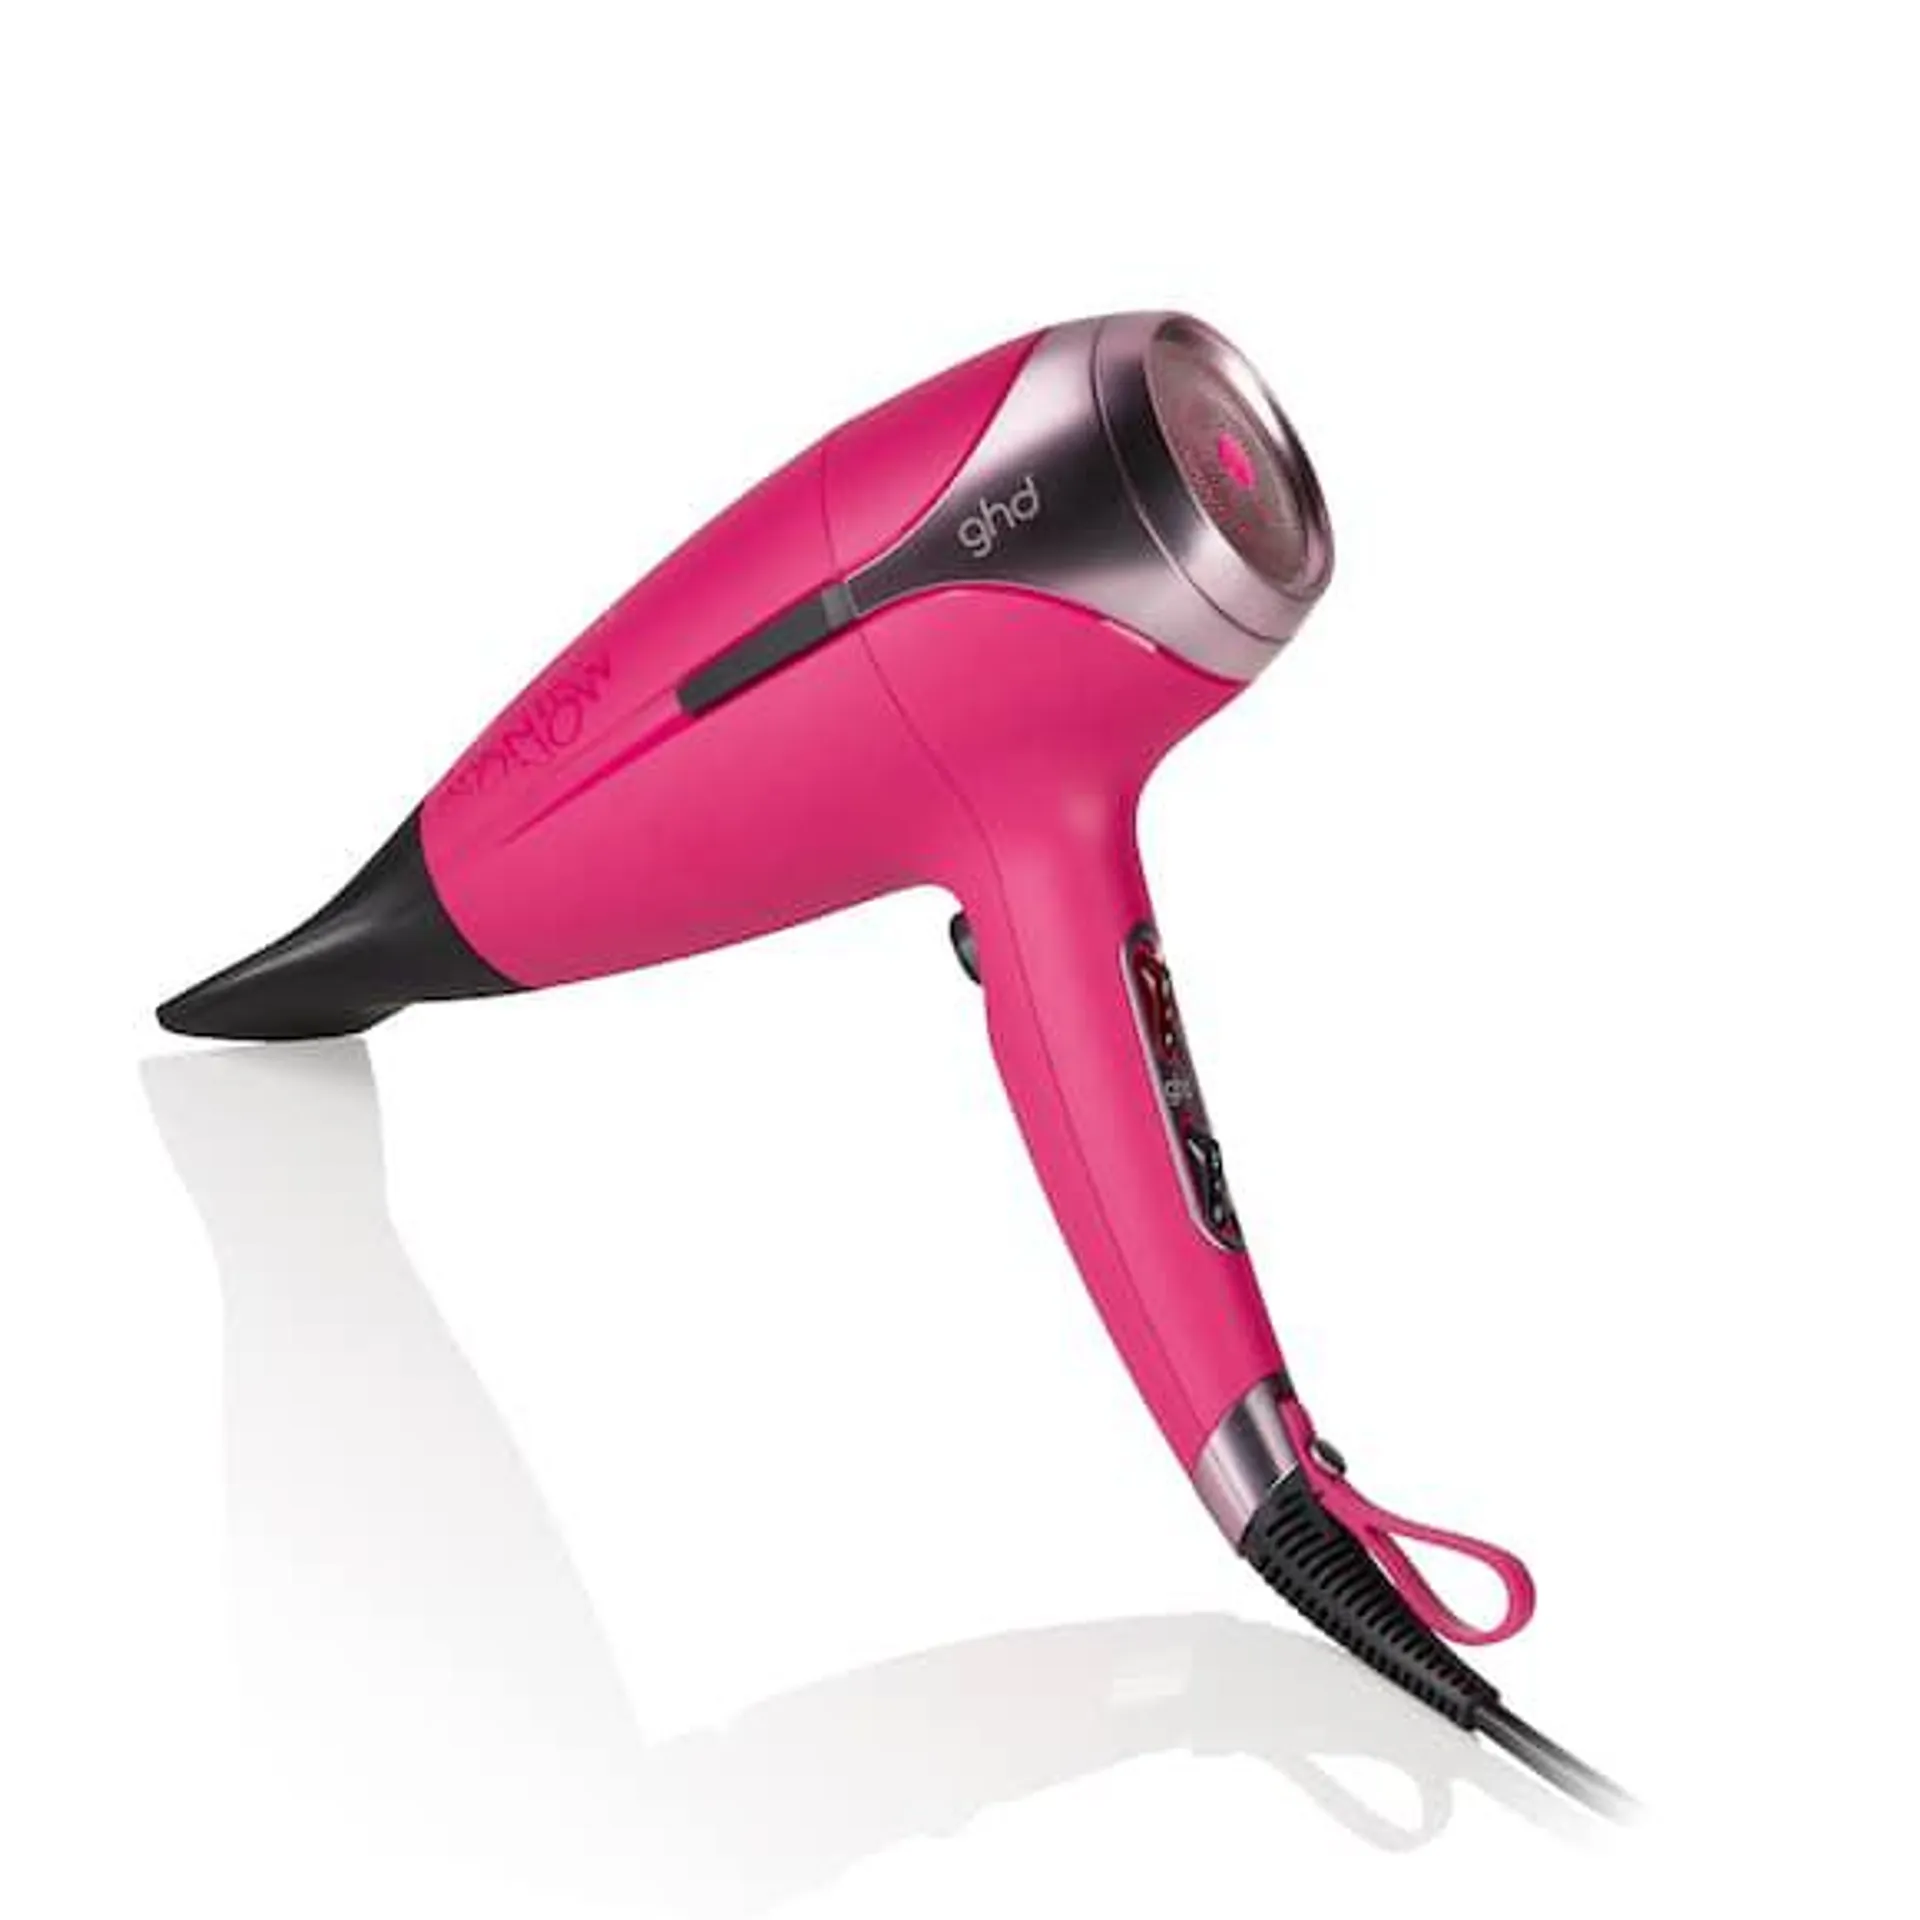 GHD HELIOS™ PROFESSIONAL HAIR DRYER IN ORCHID PINK